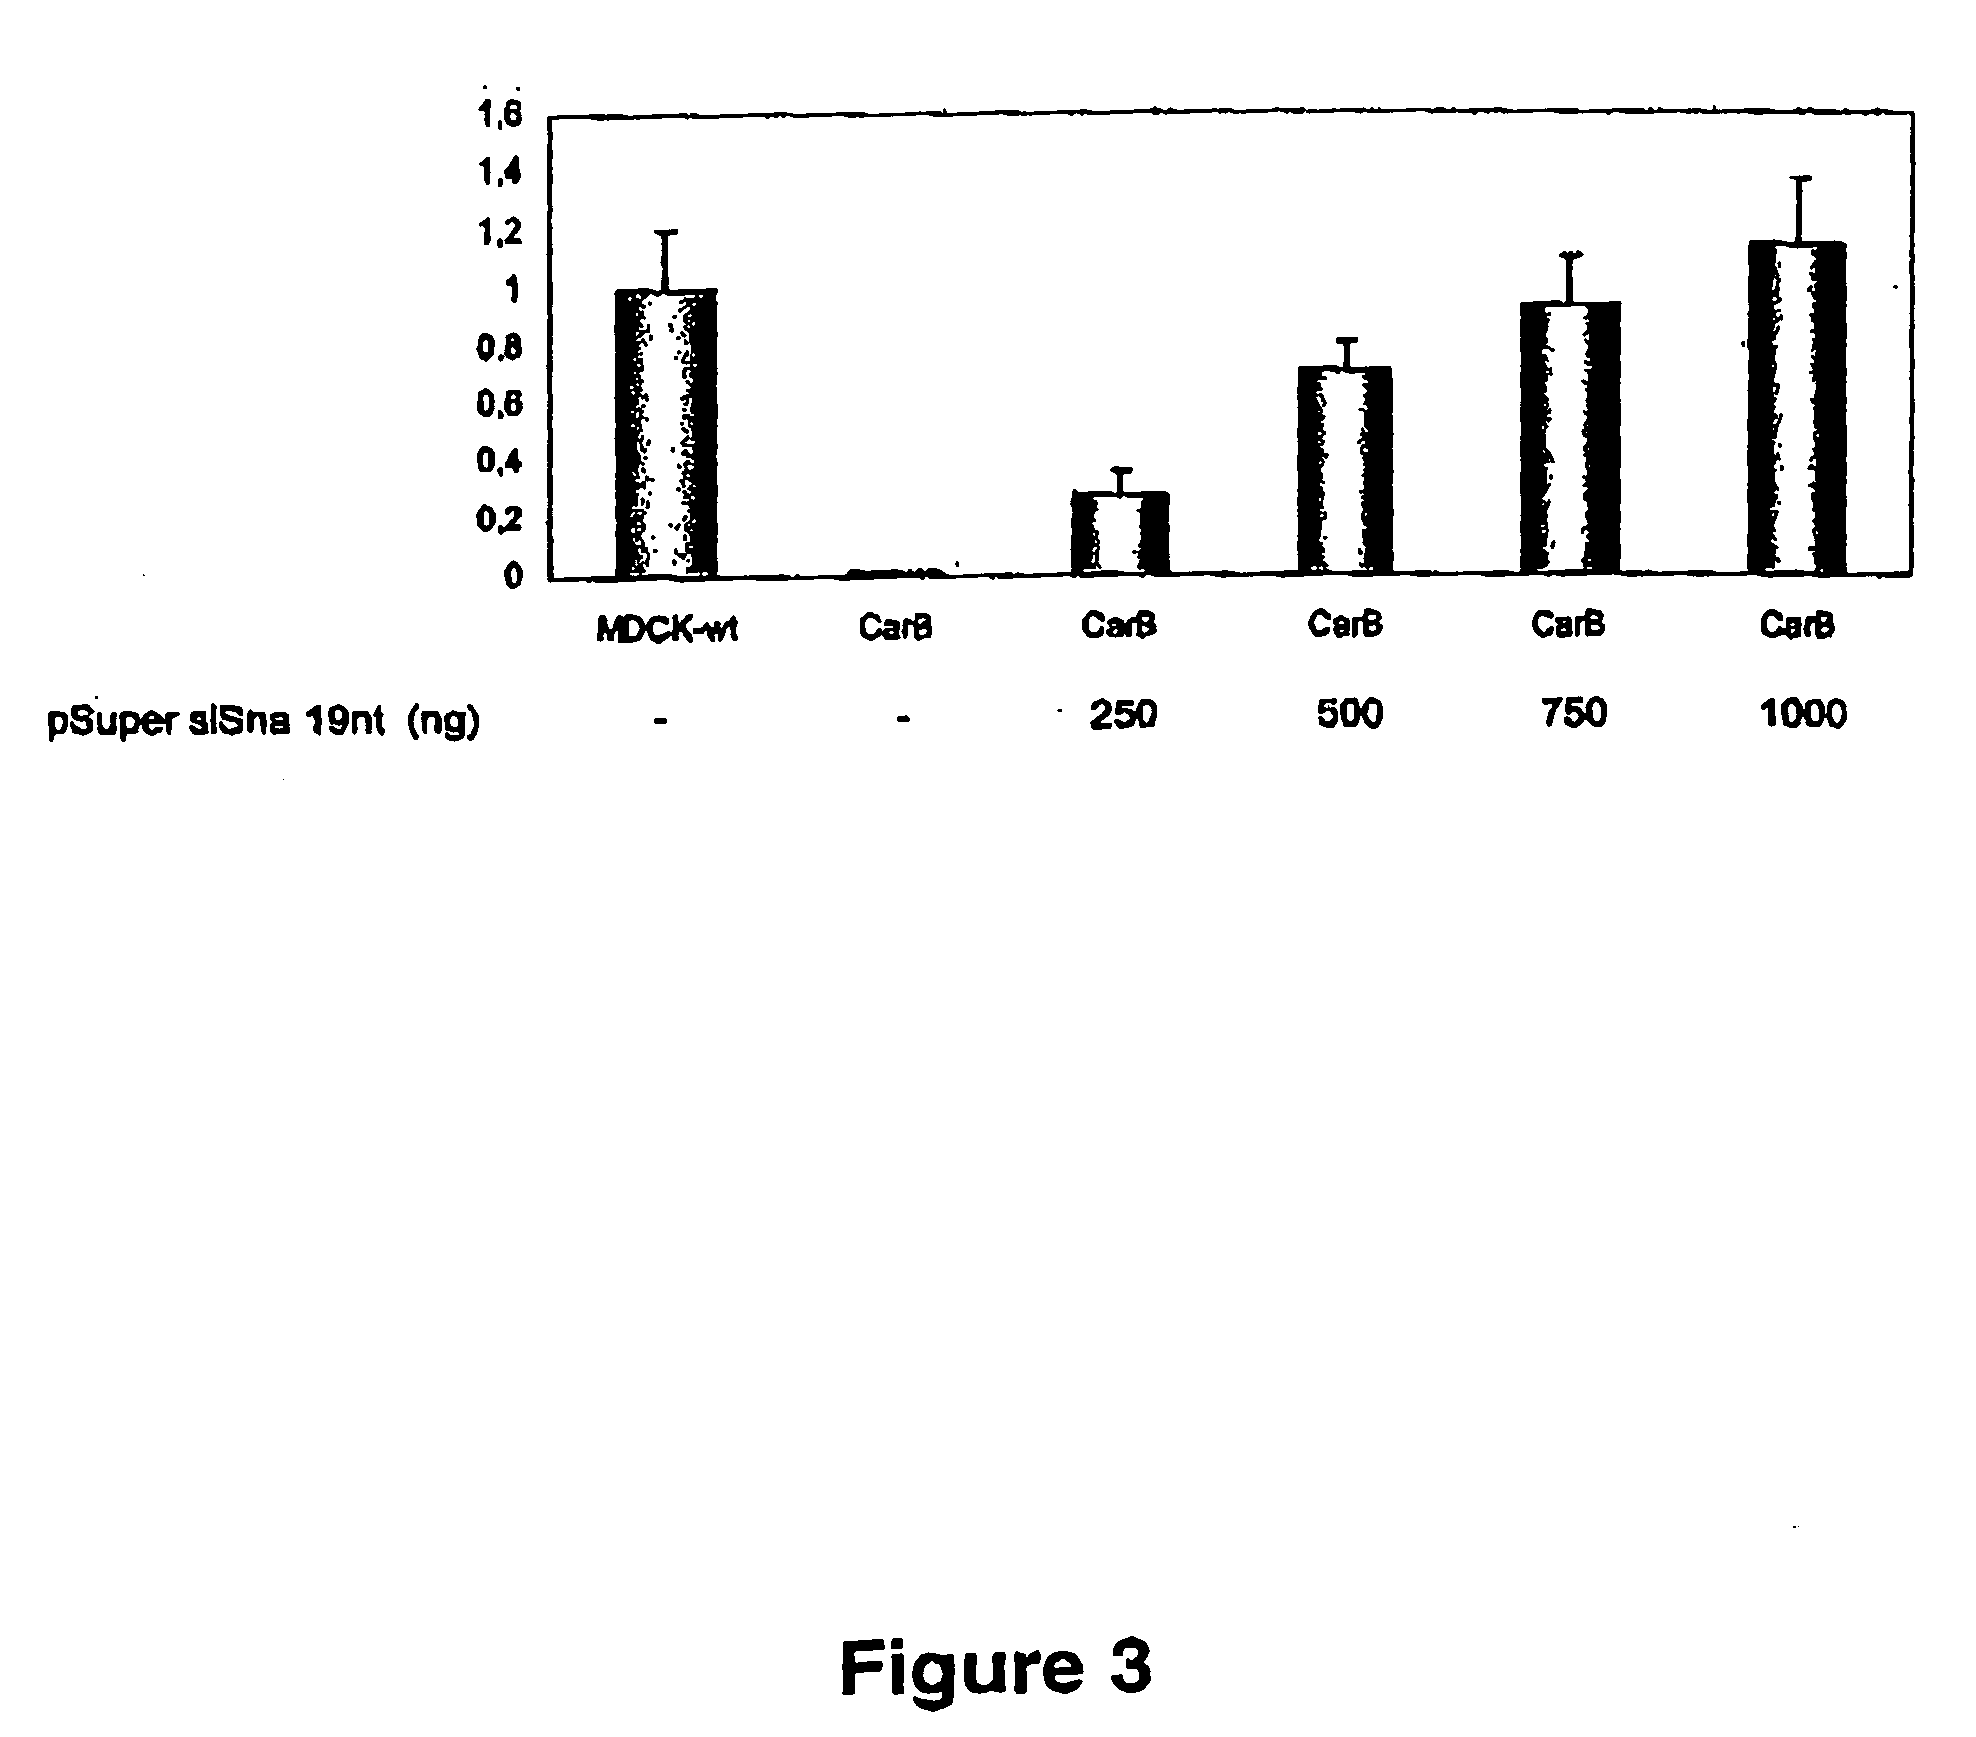 Materials and methods for the derepression of the E-cadherin promoter